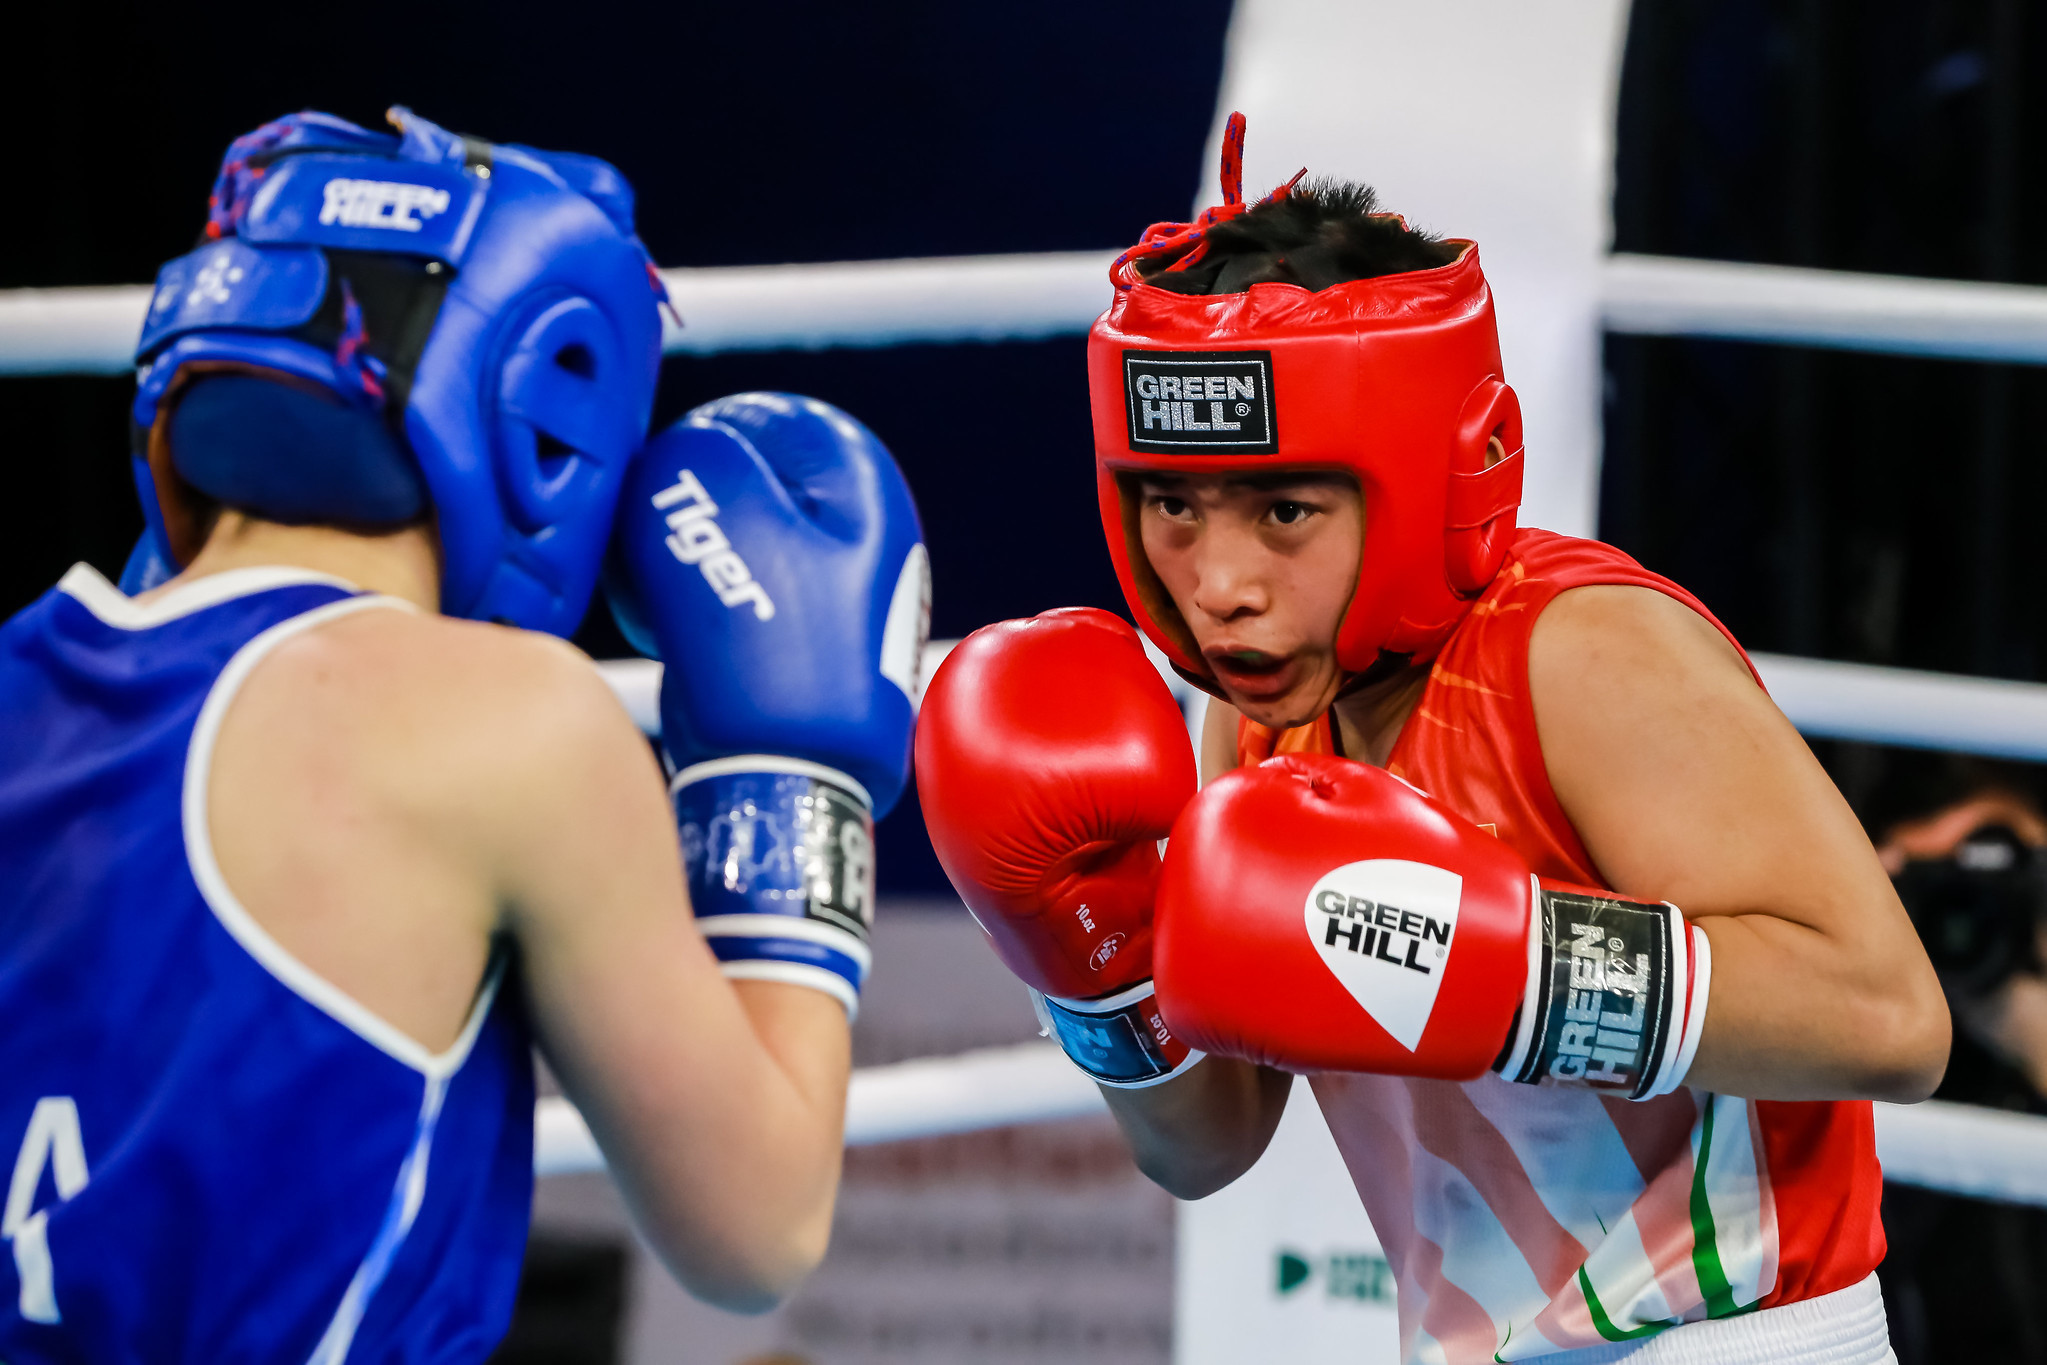 Babyrojisana Chanu was among them, with all seven Indian women's victorious today ©AIBA